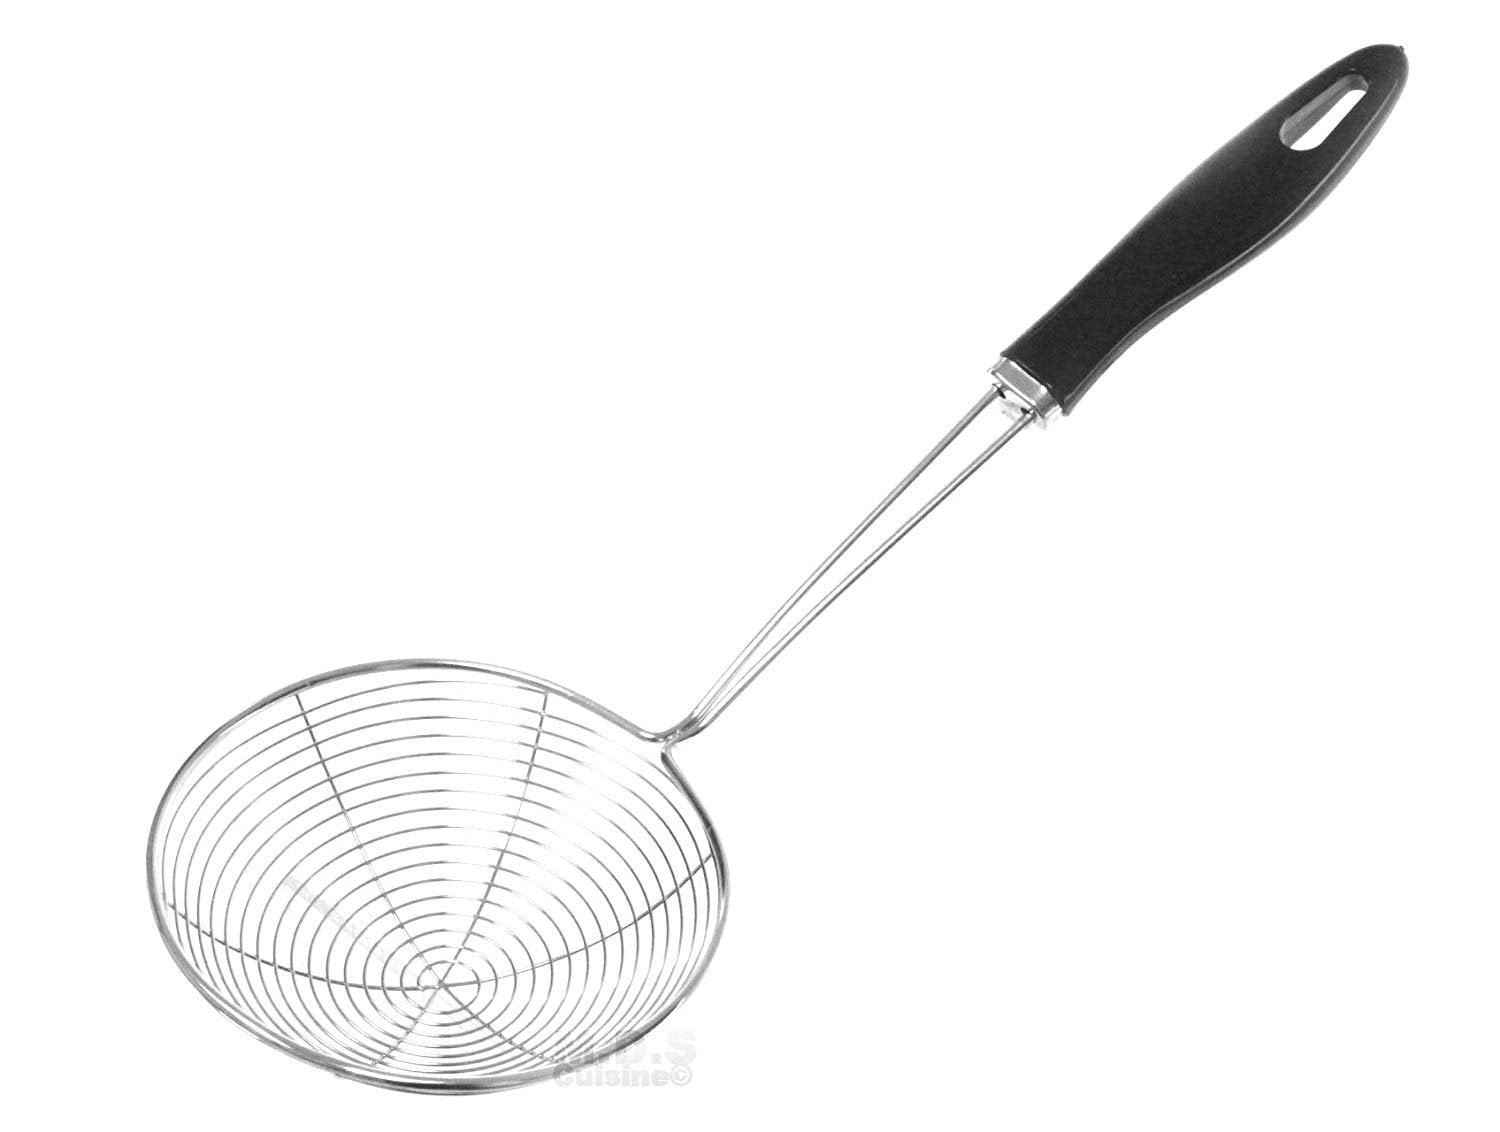 2 PCS Strainer Skimmer Spoon Small and Large Kitchen Spider Strainer Spoon Set with Handle for Hot Pot DMFSHI Stainless Steel Strainer Spoon Noodles and Oil Filtering Frying